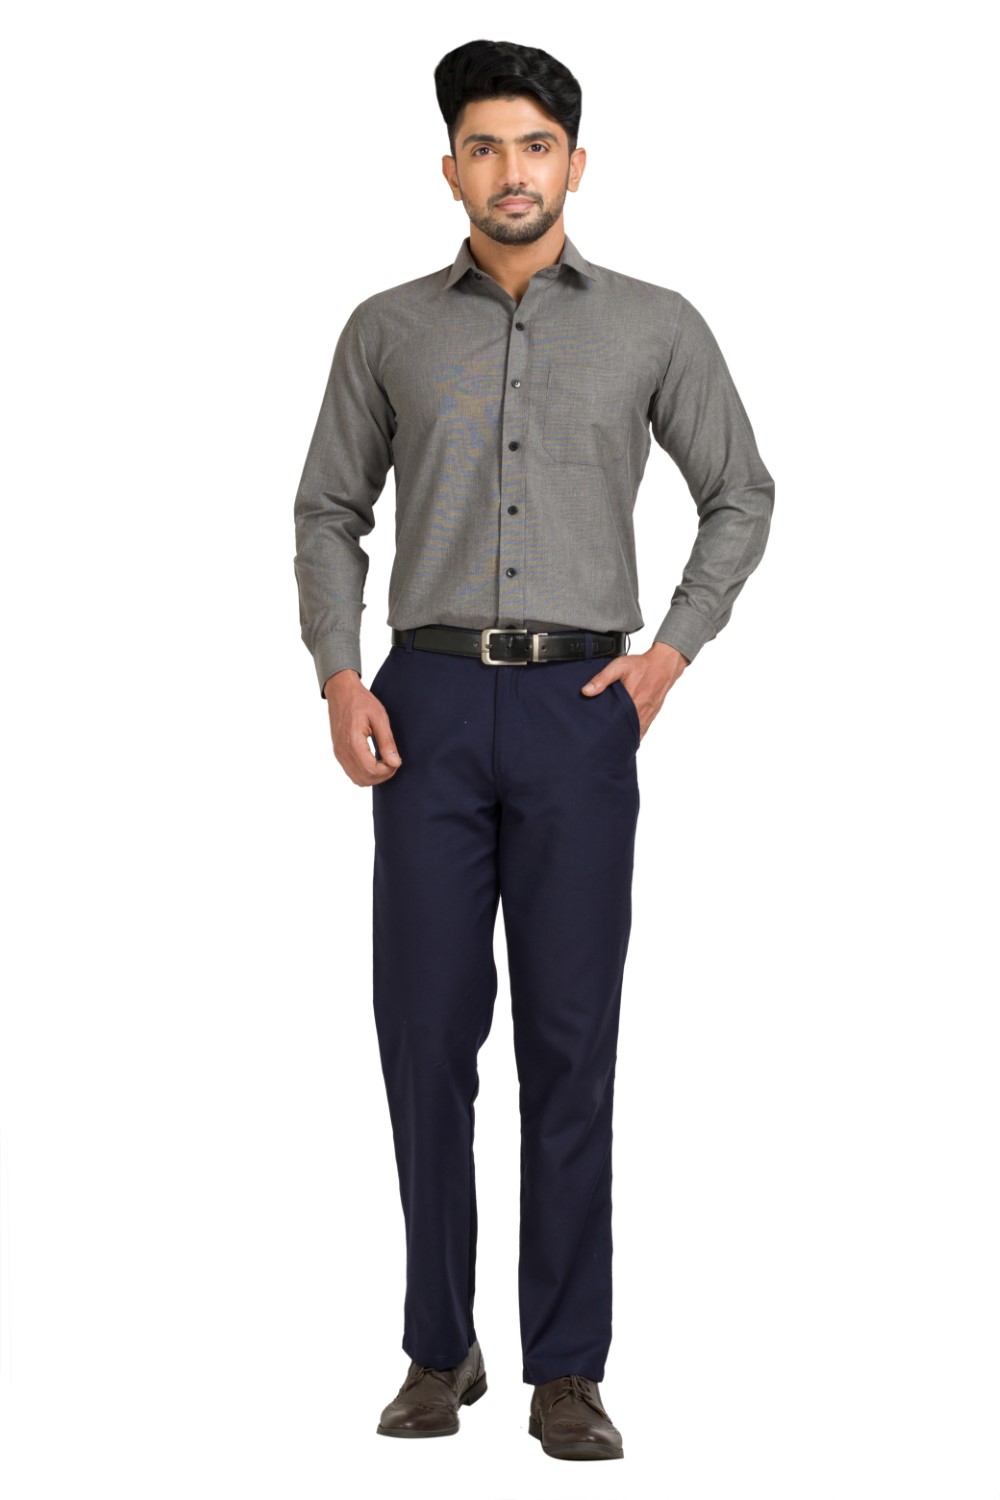 Classic textured Charcoal Color Full Sleeve Cotton Blend Shirt With A Regular fit and easy maintenance.